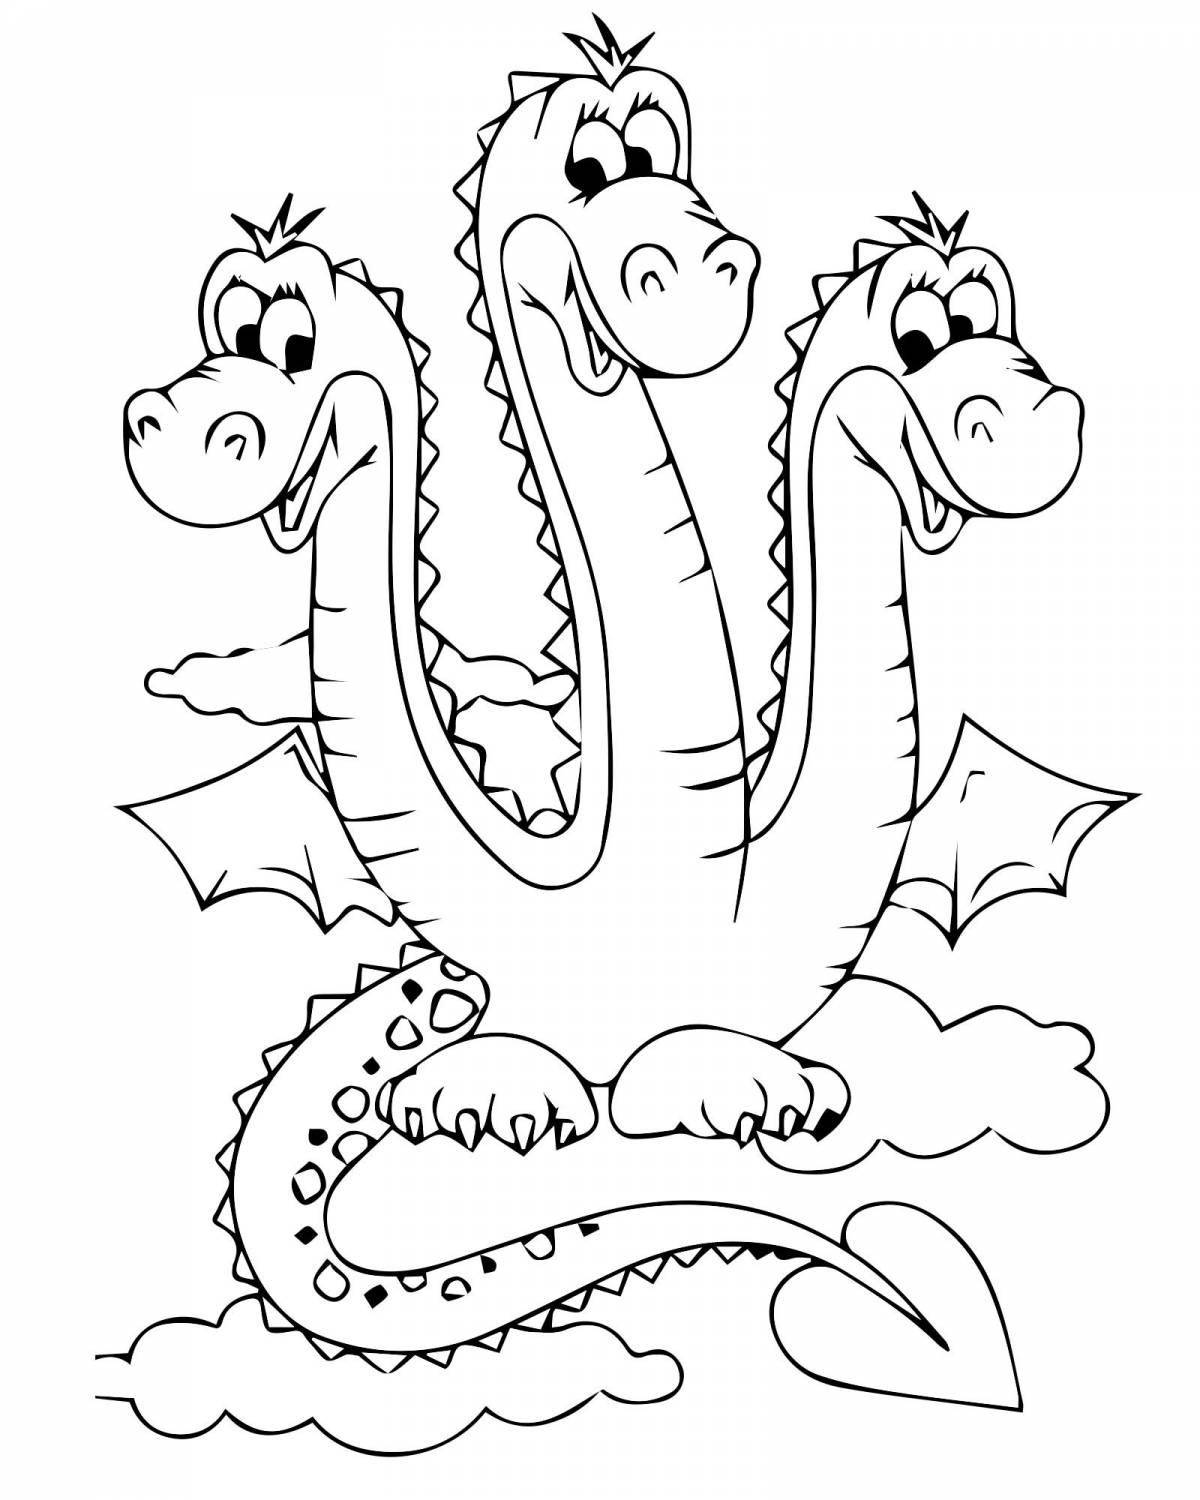 Large three-headed dragon coloring page